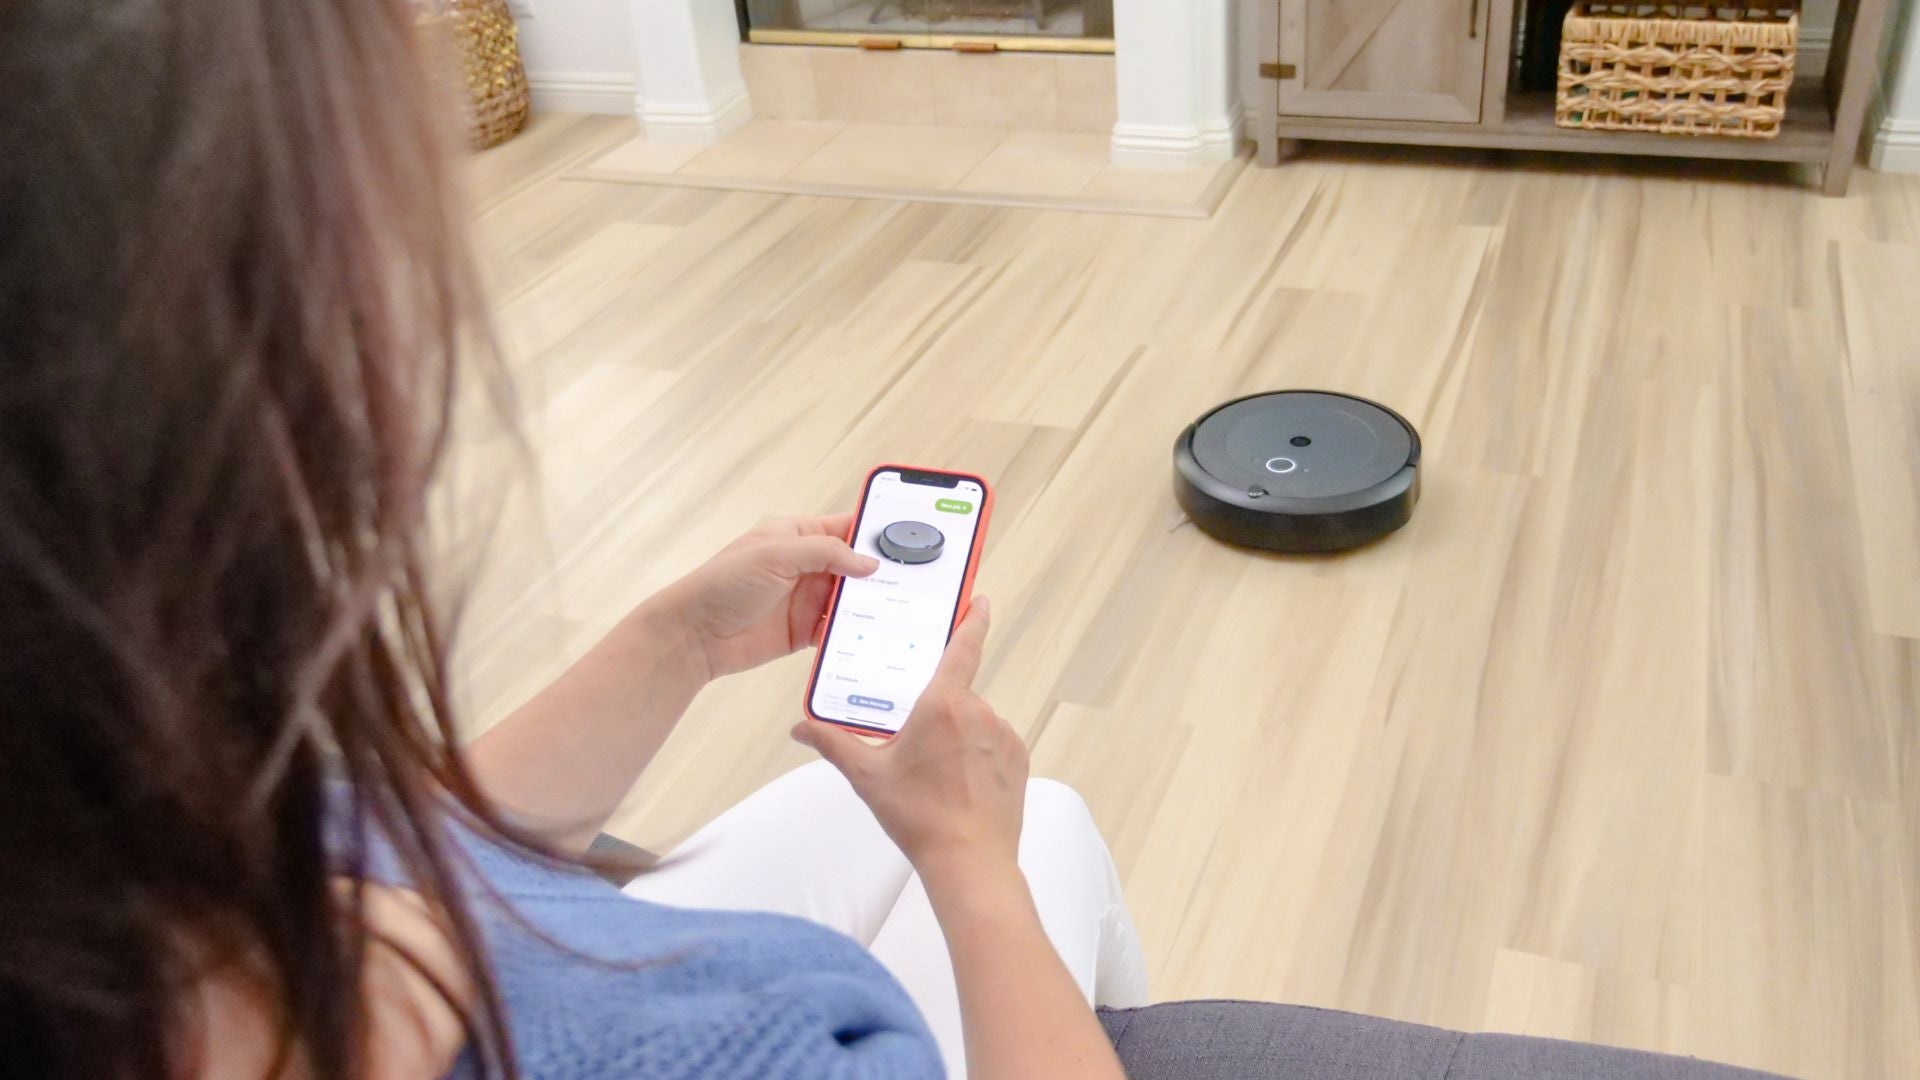 Robot Vacuum vs. Robot Mop: What Can the B50 Pro Handle?